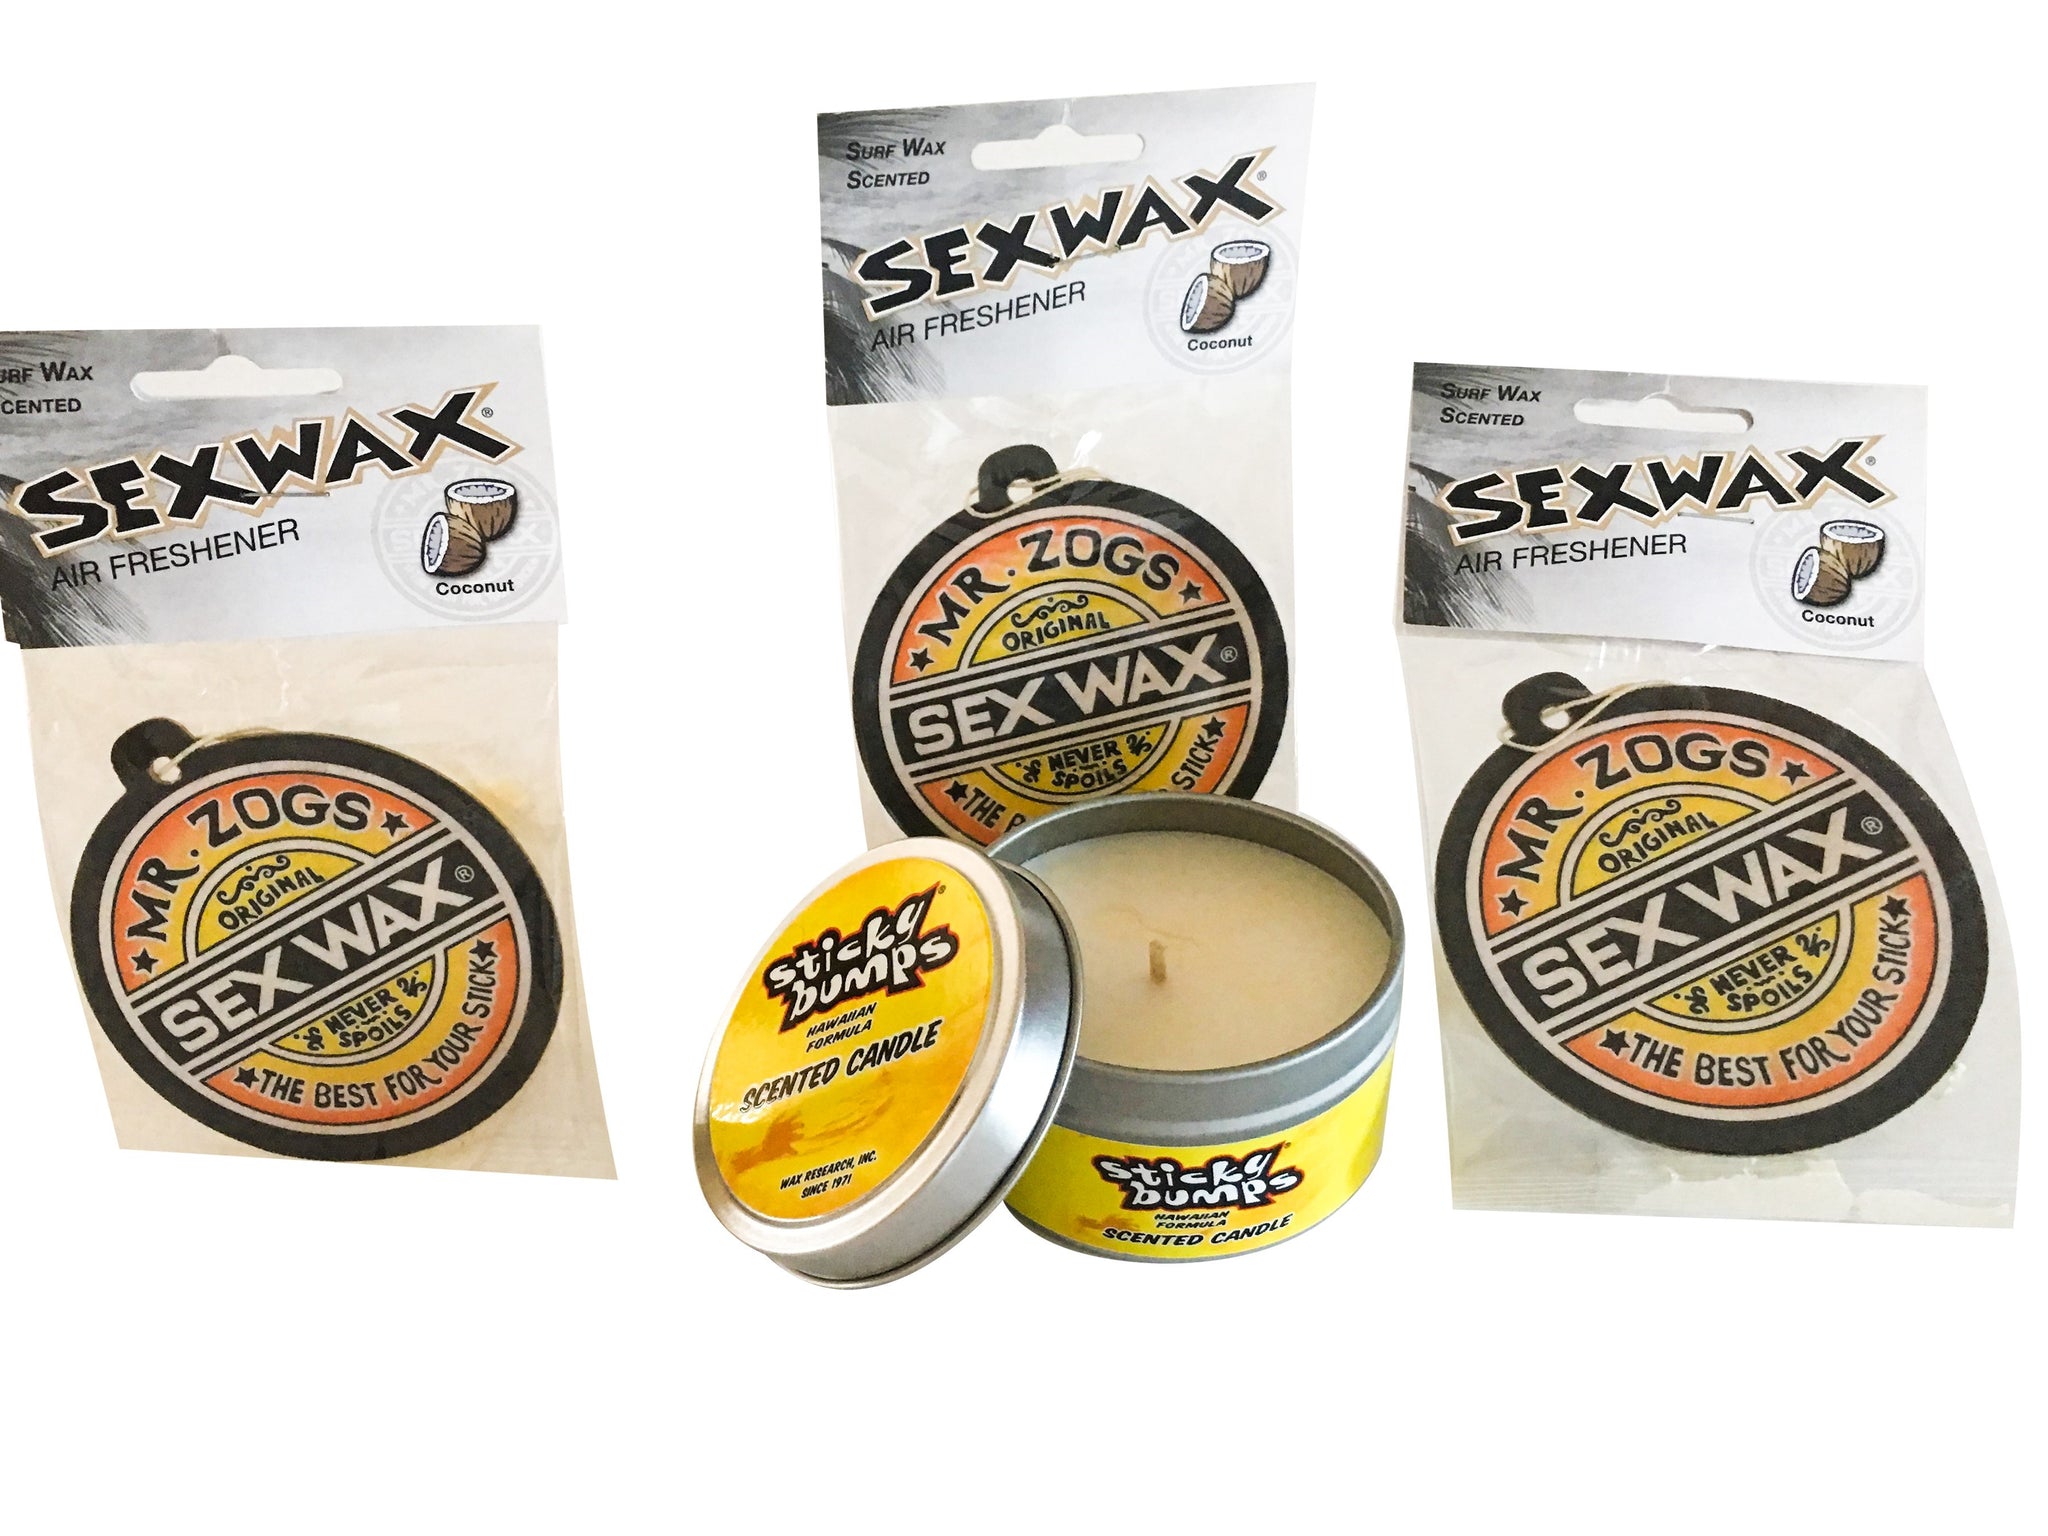 Sticky Bumps Coconut Candle: Plus 3 Sex Wax Coconut Air Fresheners